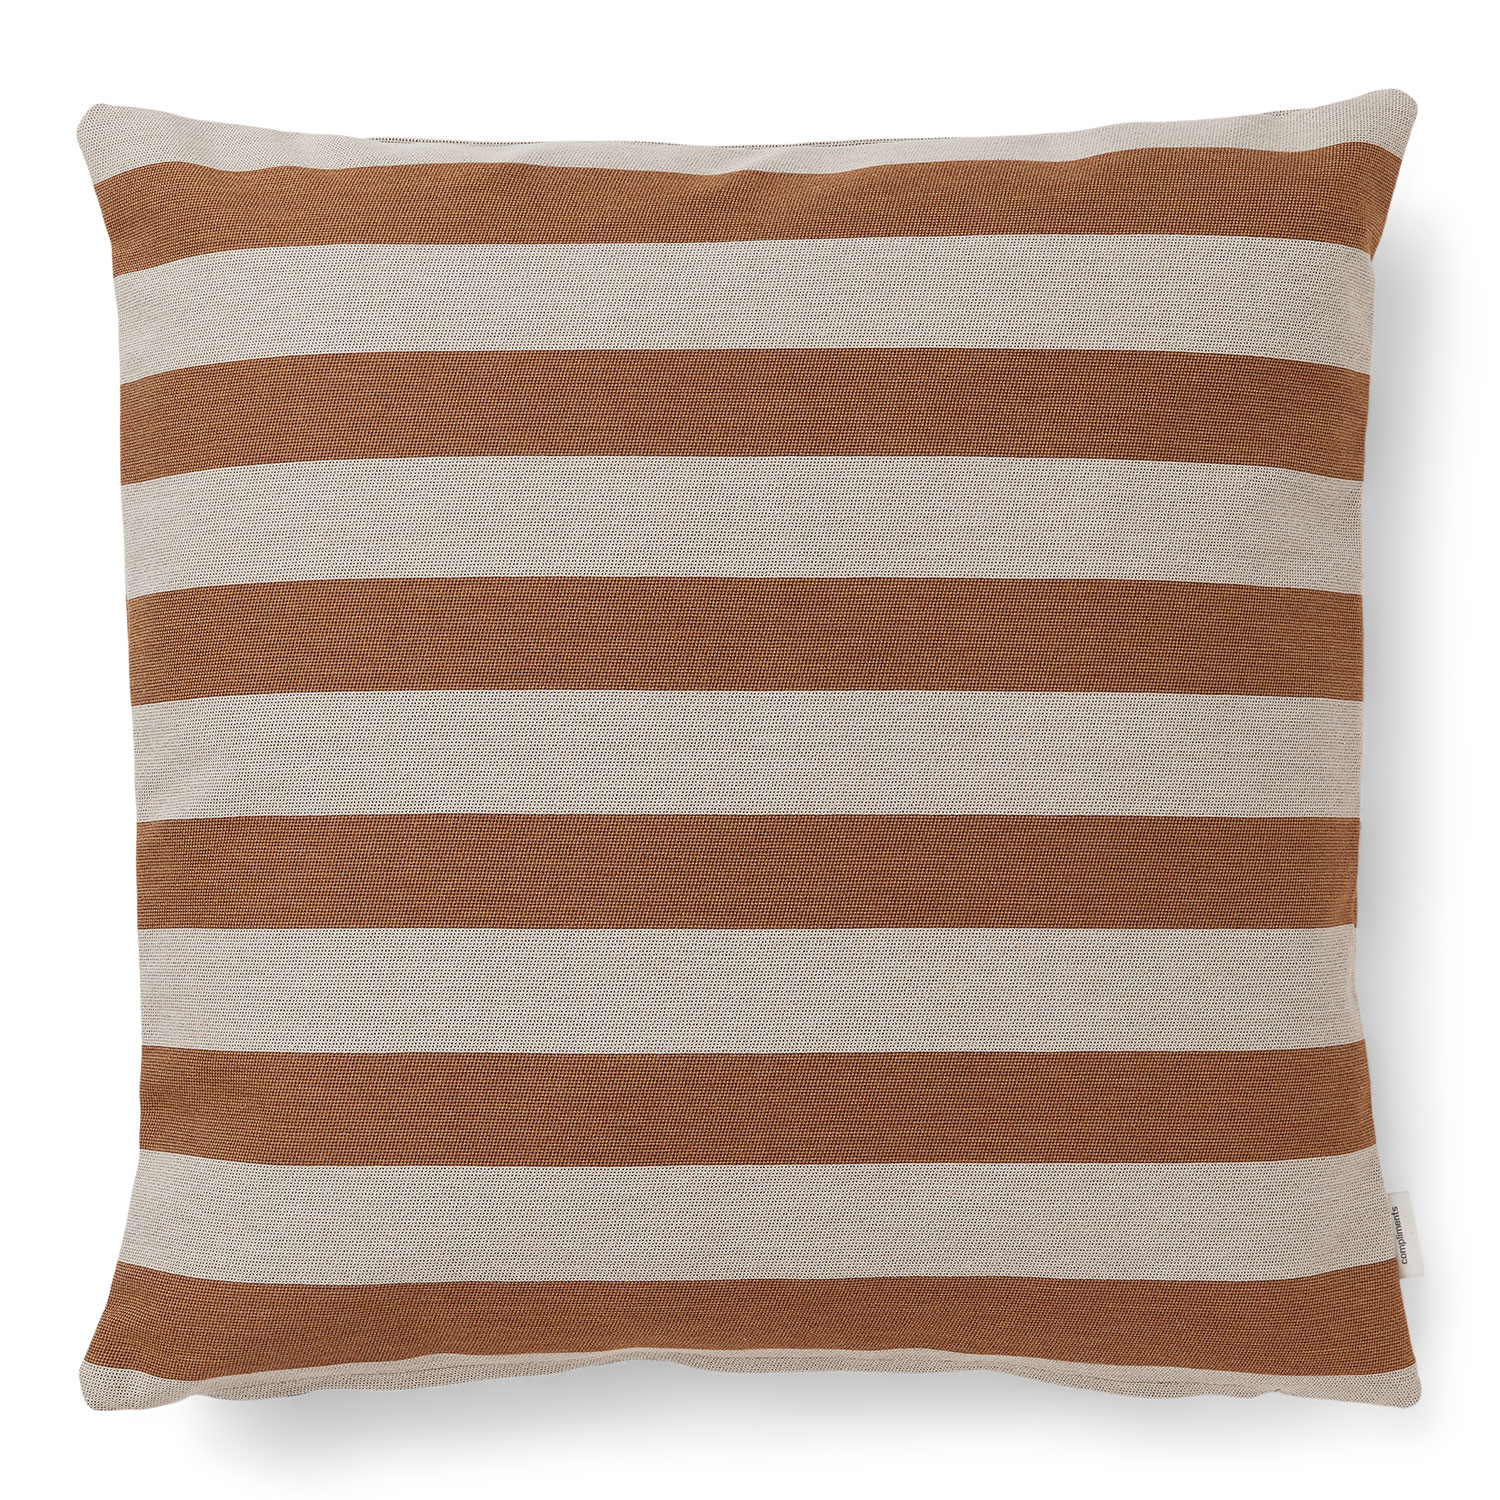 Compliments Pude Outdoor Stripe, Terracotta